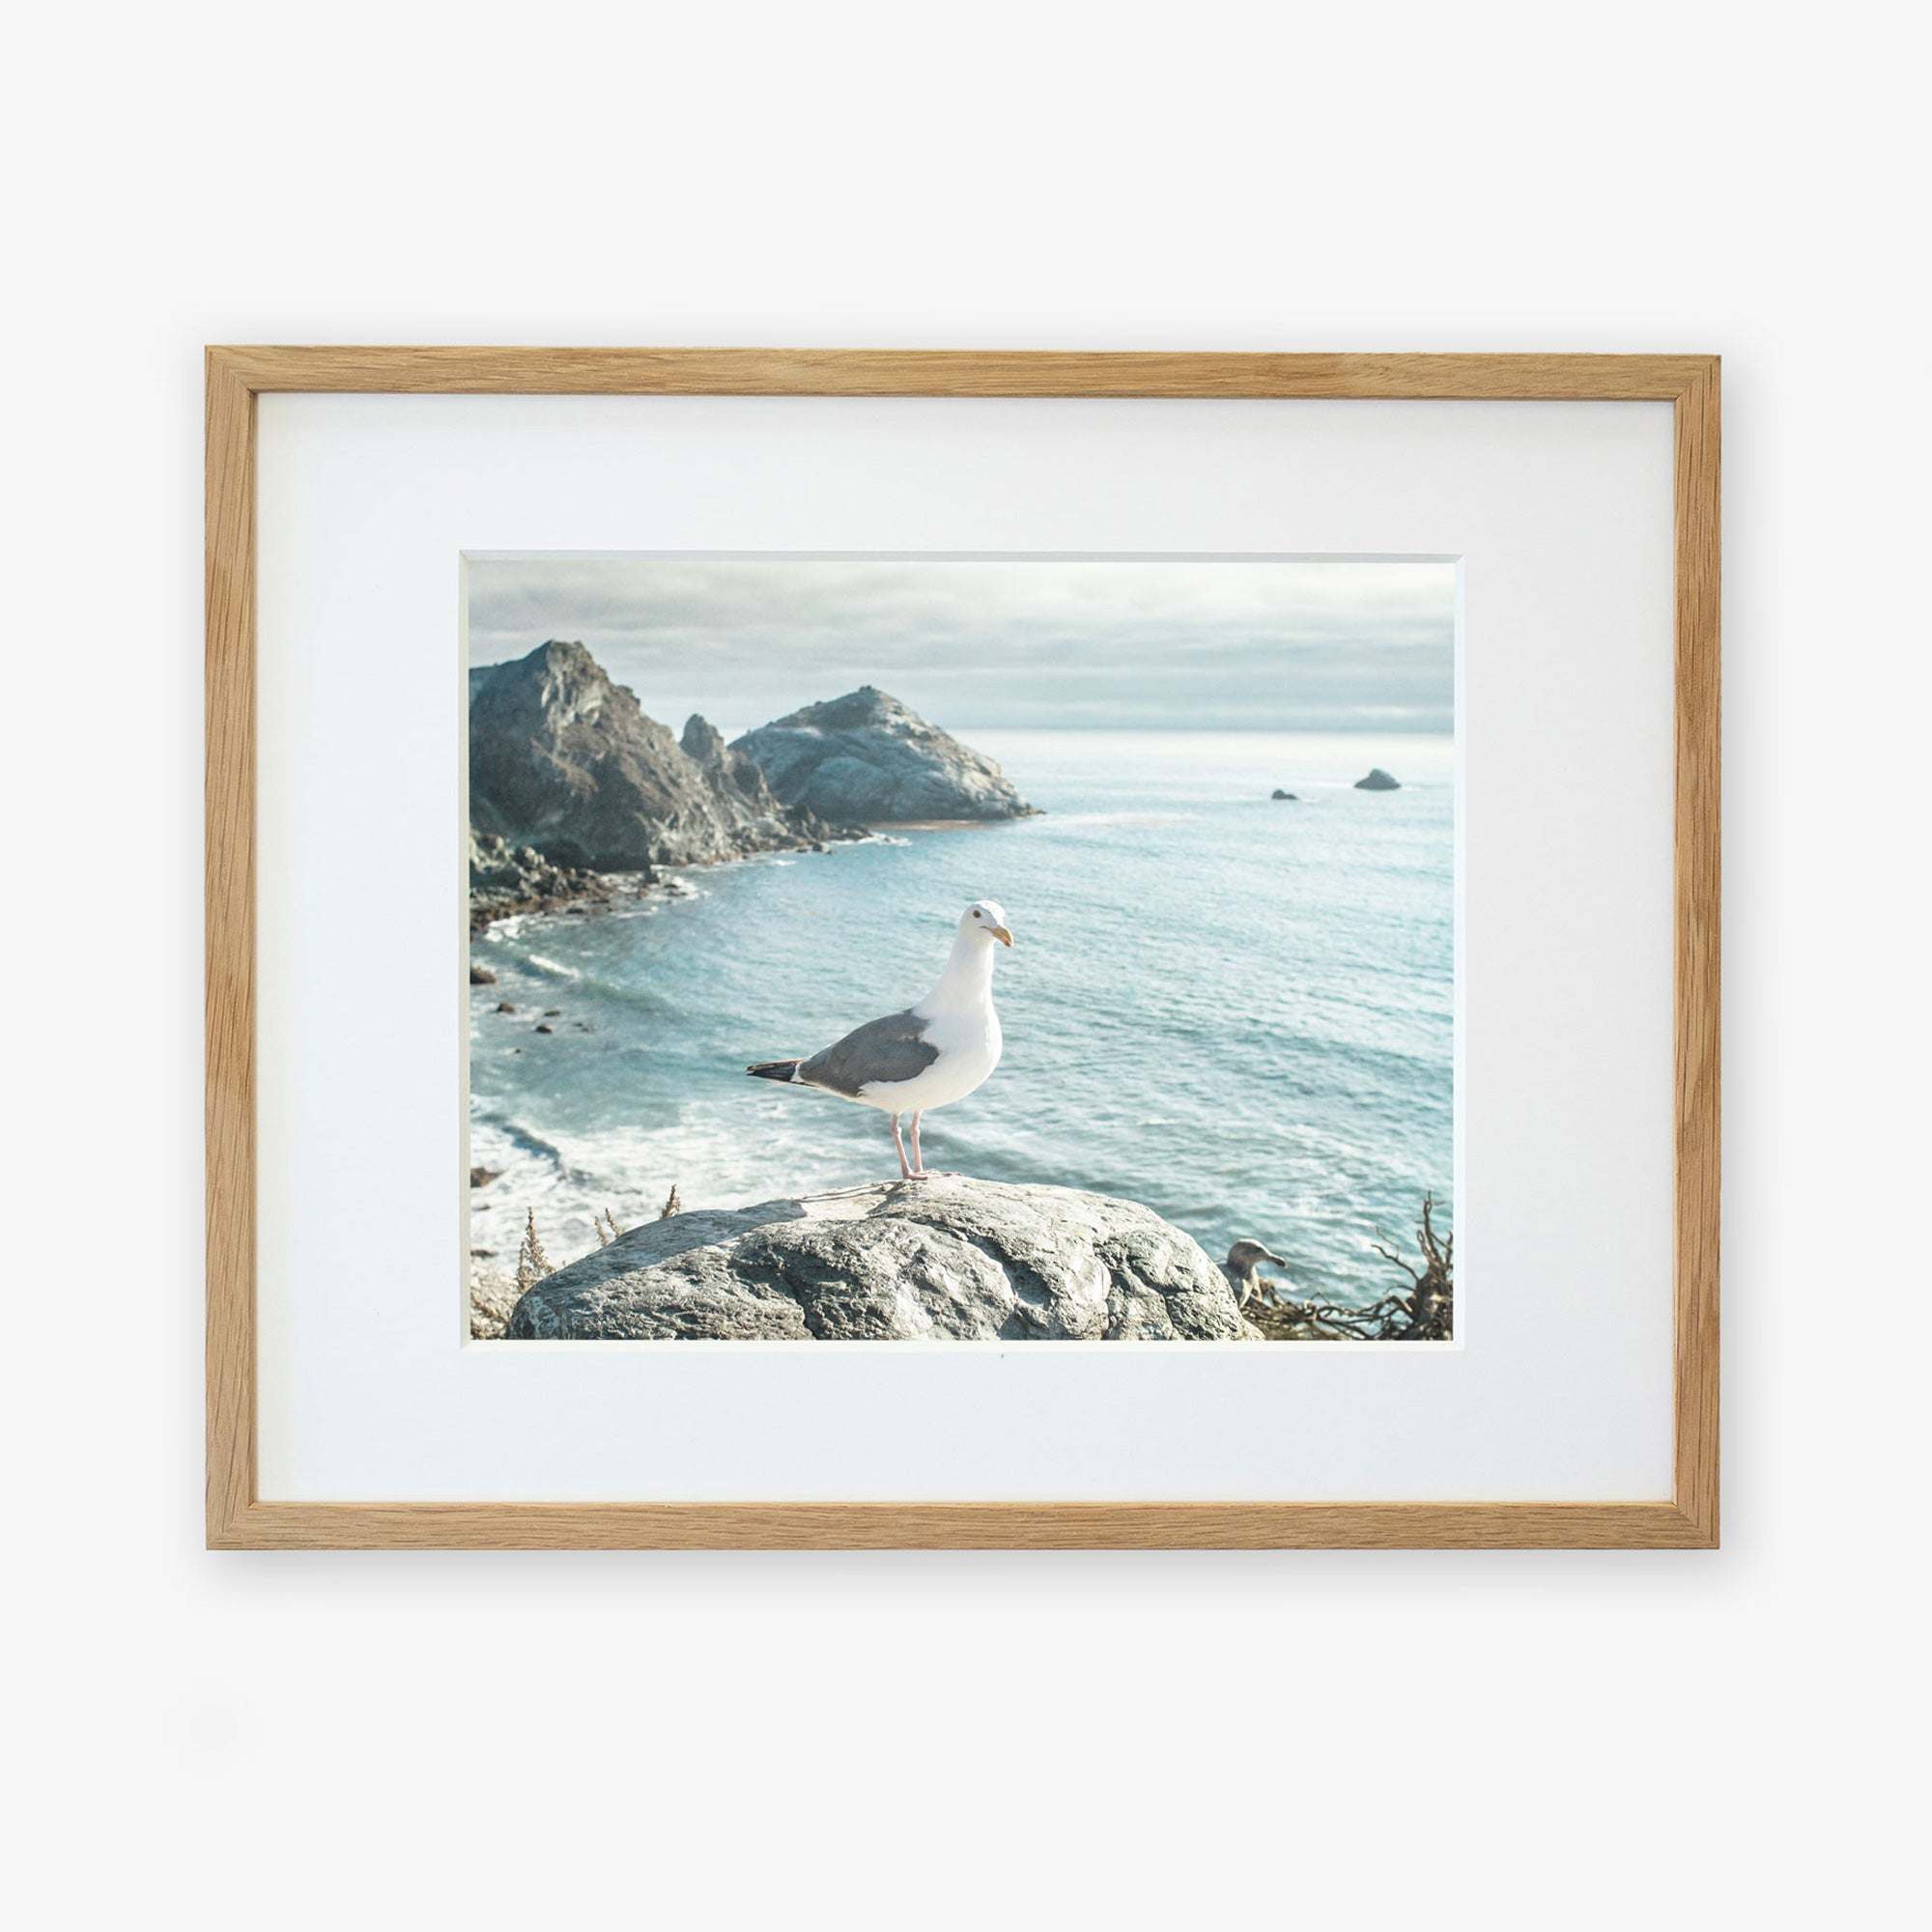 A framed photograph depicting a seagull standing on a rocky cliff with ocean waves and distant rocky islands in the background, printed on archival photographic paper and hung on a white wall - Offley Green's Big Sur Landscape Print, 'Lobster Mornay For Tea'.